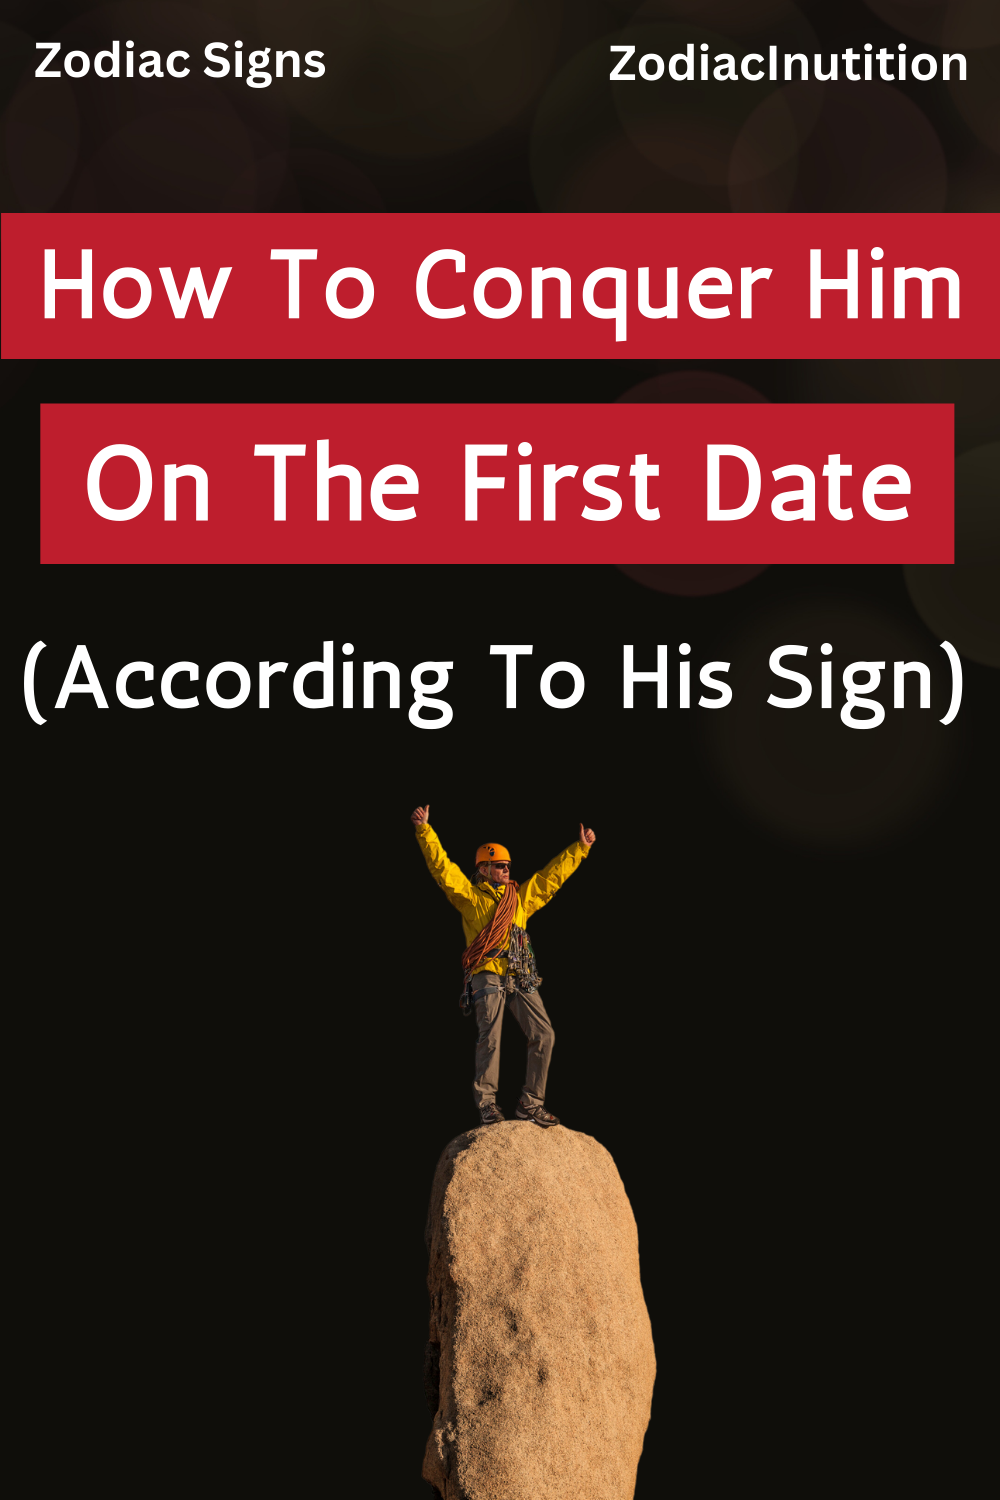 How To Conquer Him On The First Date (According To His Sign)